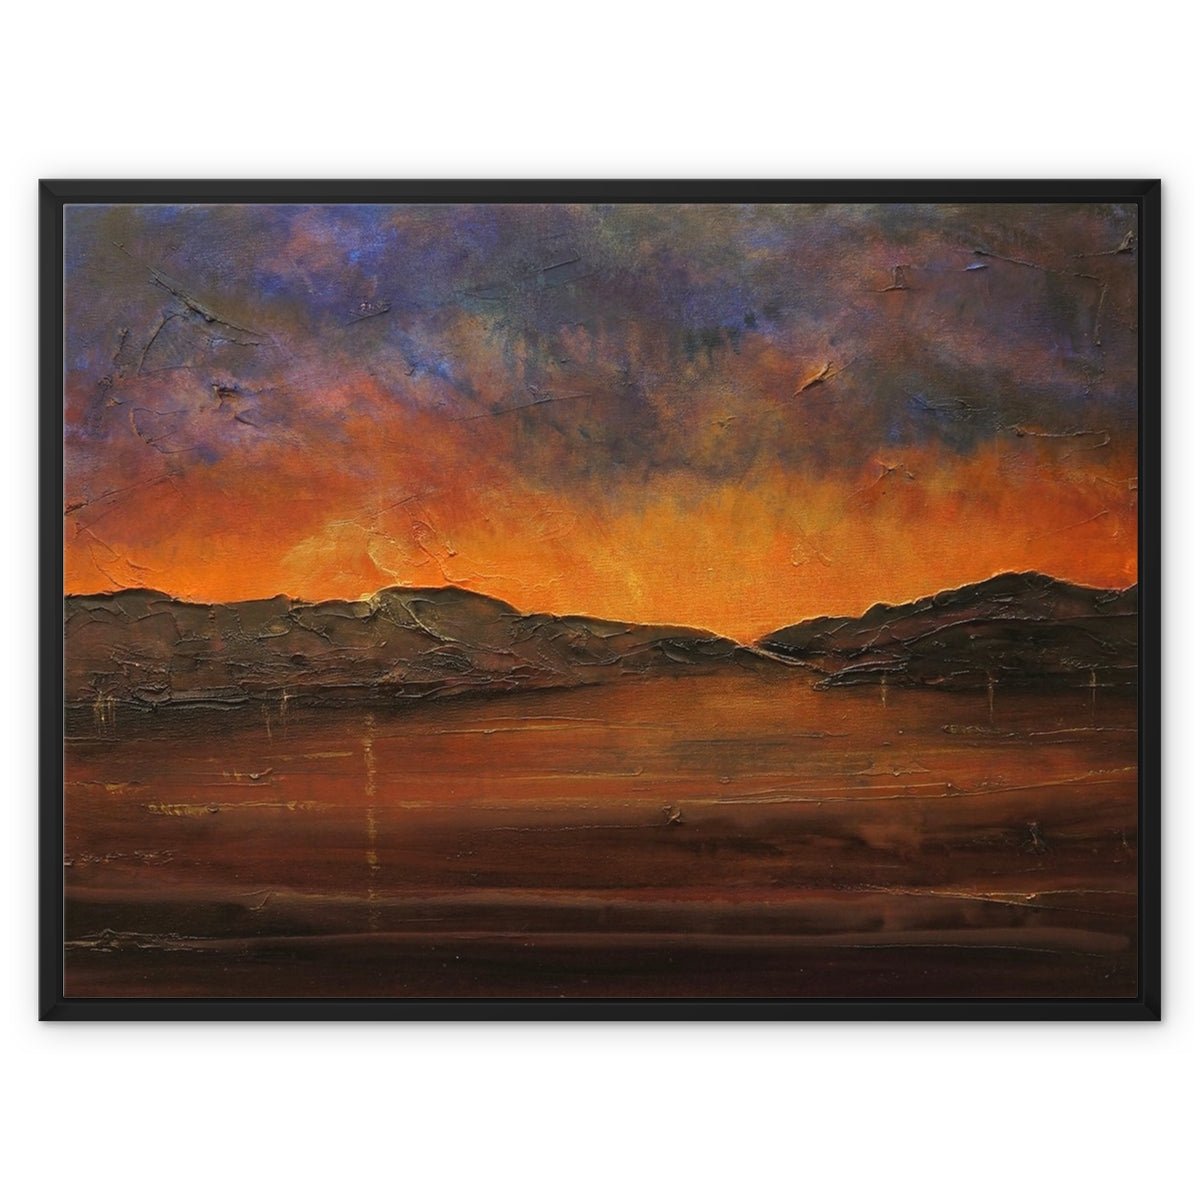 A Brooding River Clyde Dusk Painting | Framed Canvas-Floating Framed Canvas Prints-River Clyde Art Gallery-32"x24"-Black Frame-Paintings, Prints, Homeware, Art Gifts From Scotland By Scottish Artist Kevin Hunter